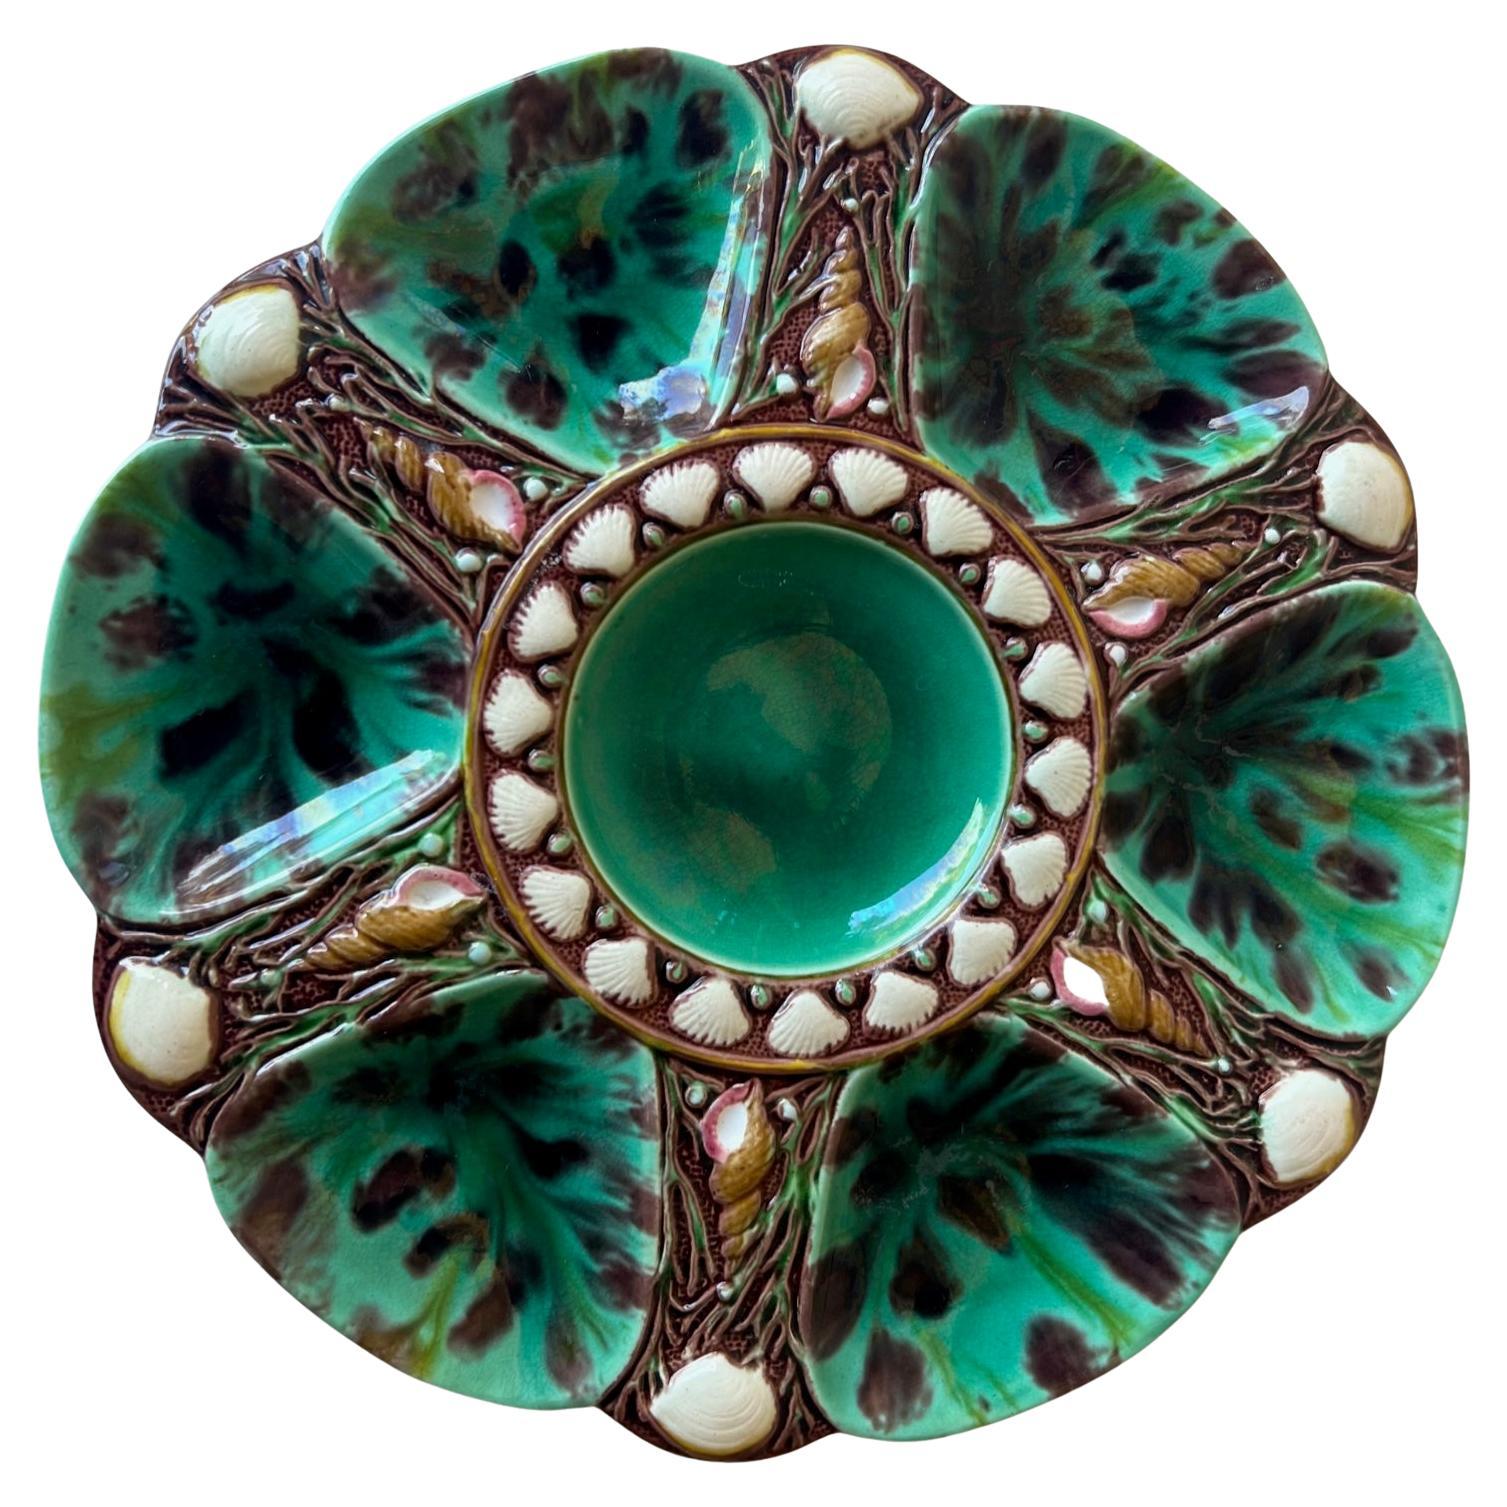 Antique Minton Green Majolica Oyster Plate, circa 1860's-1870's For Sale